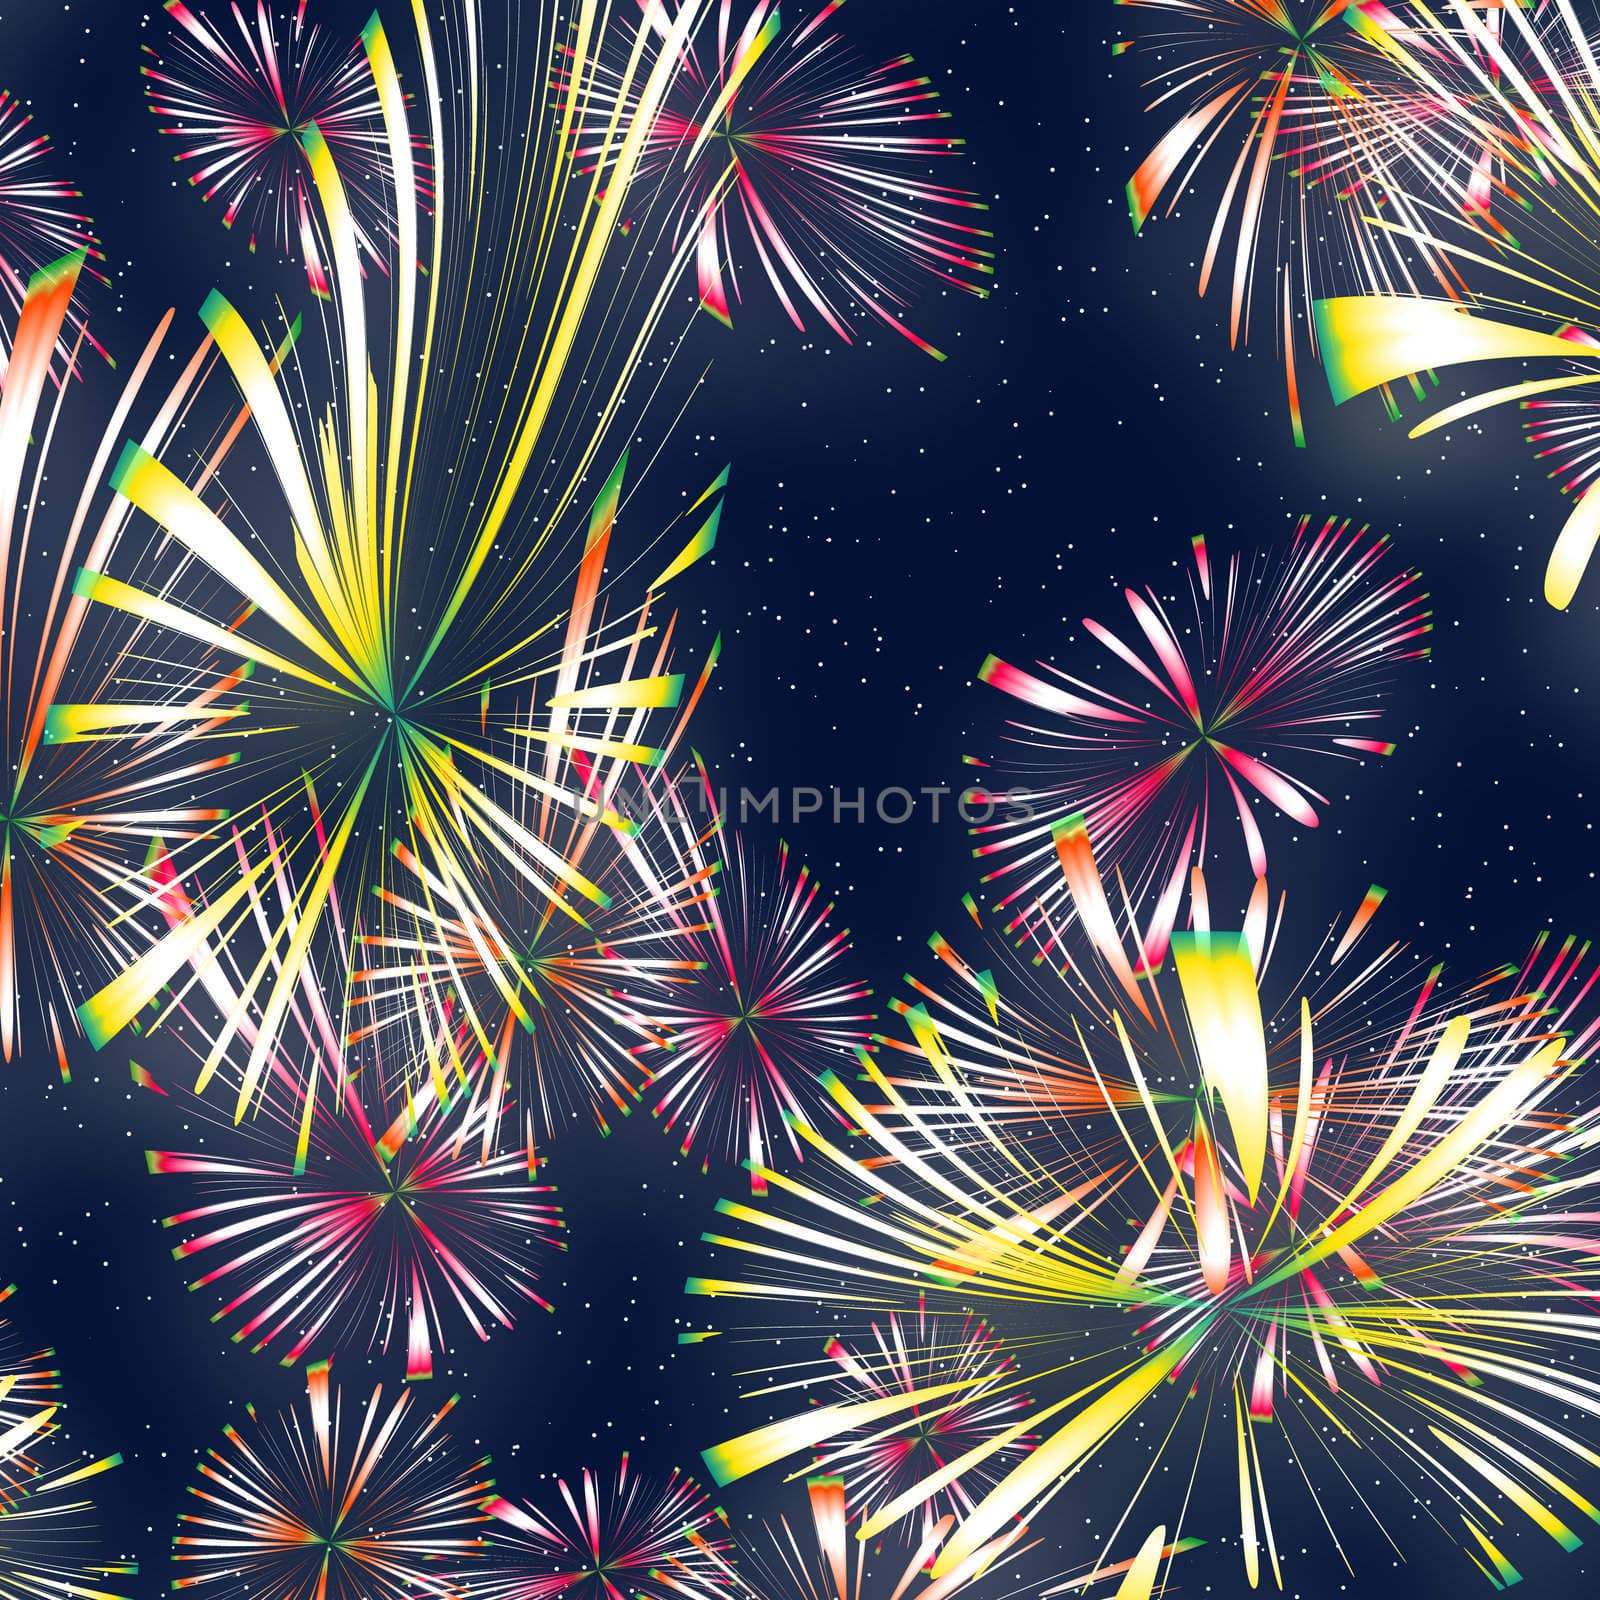 a nice illustration of bright and colourful fireworks